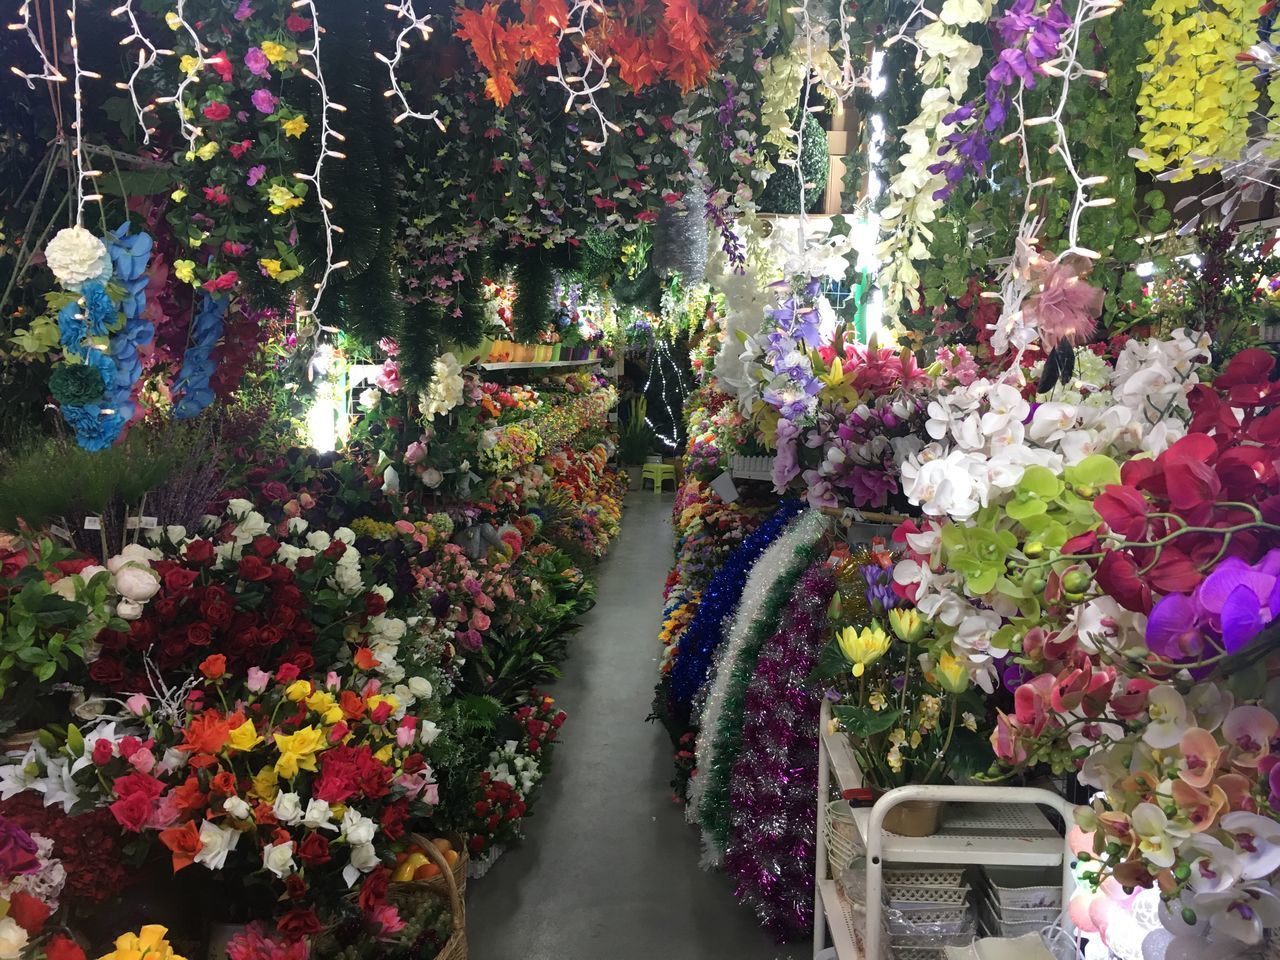 FLOWERS FOR SALE AT STORE